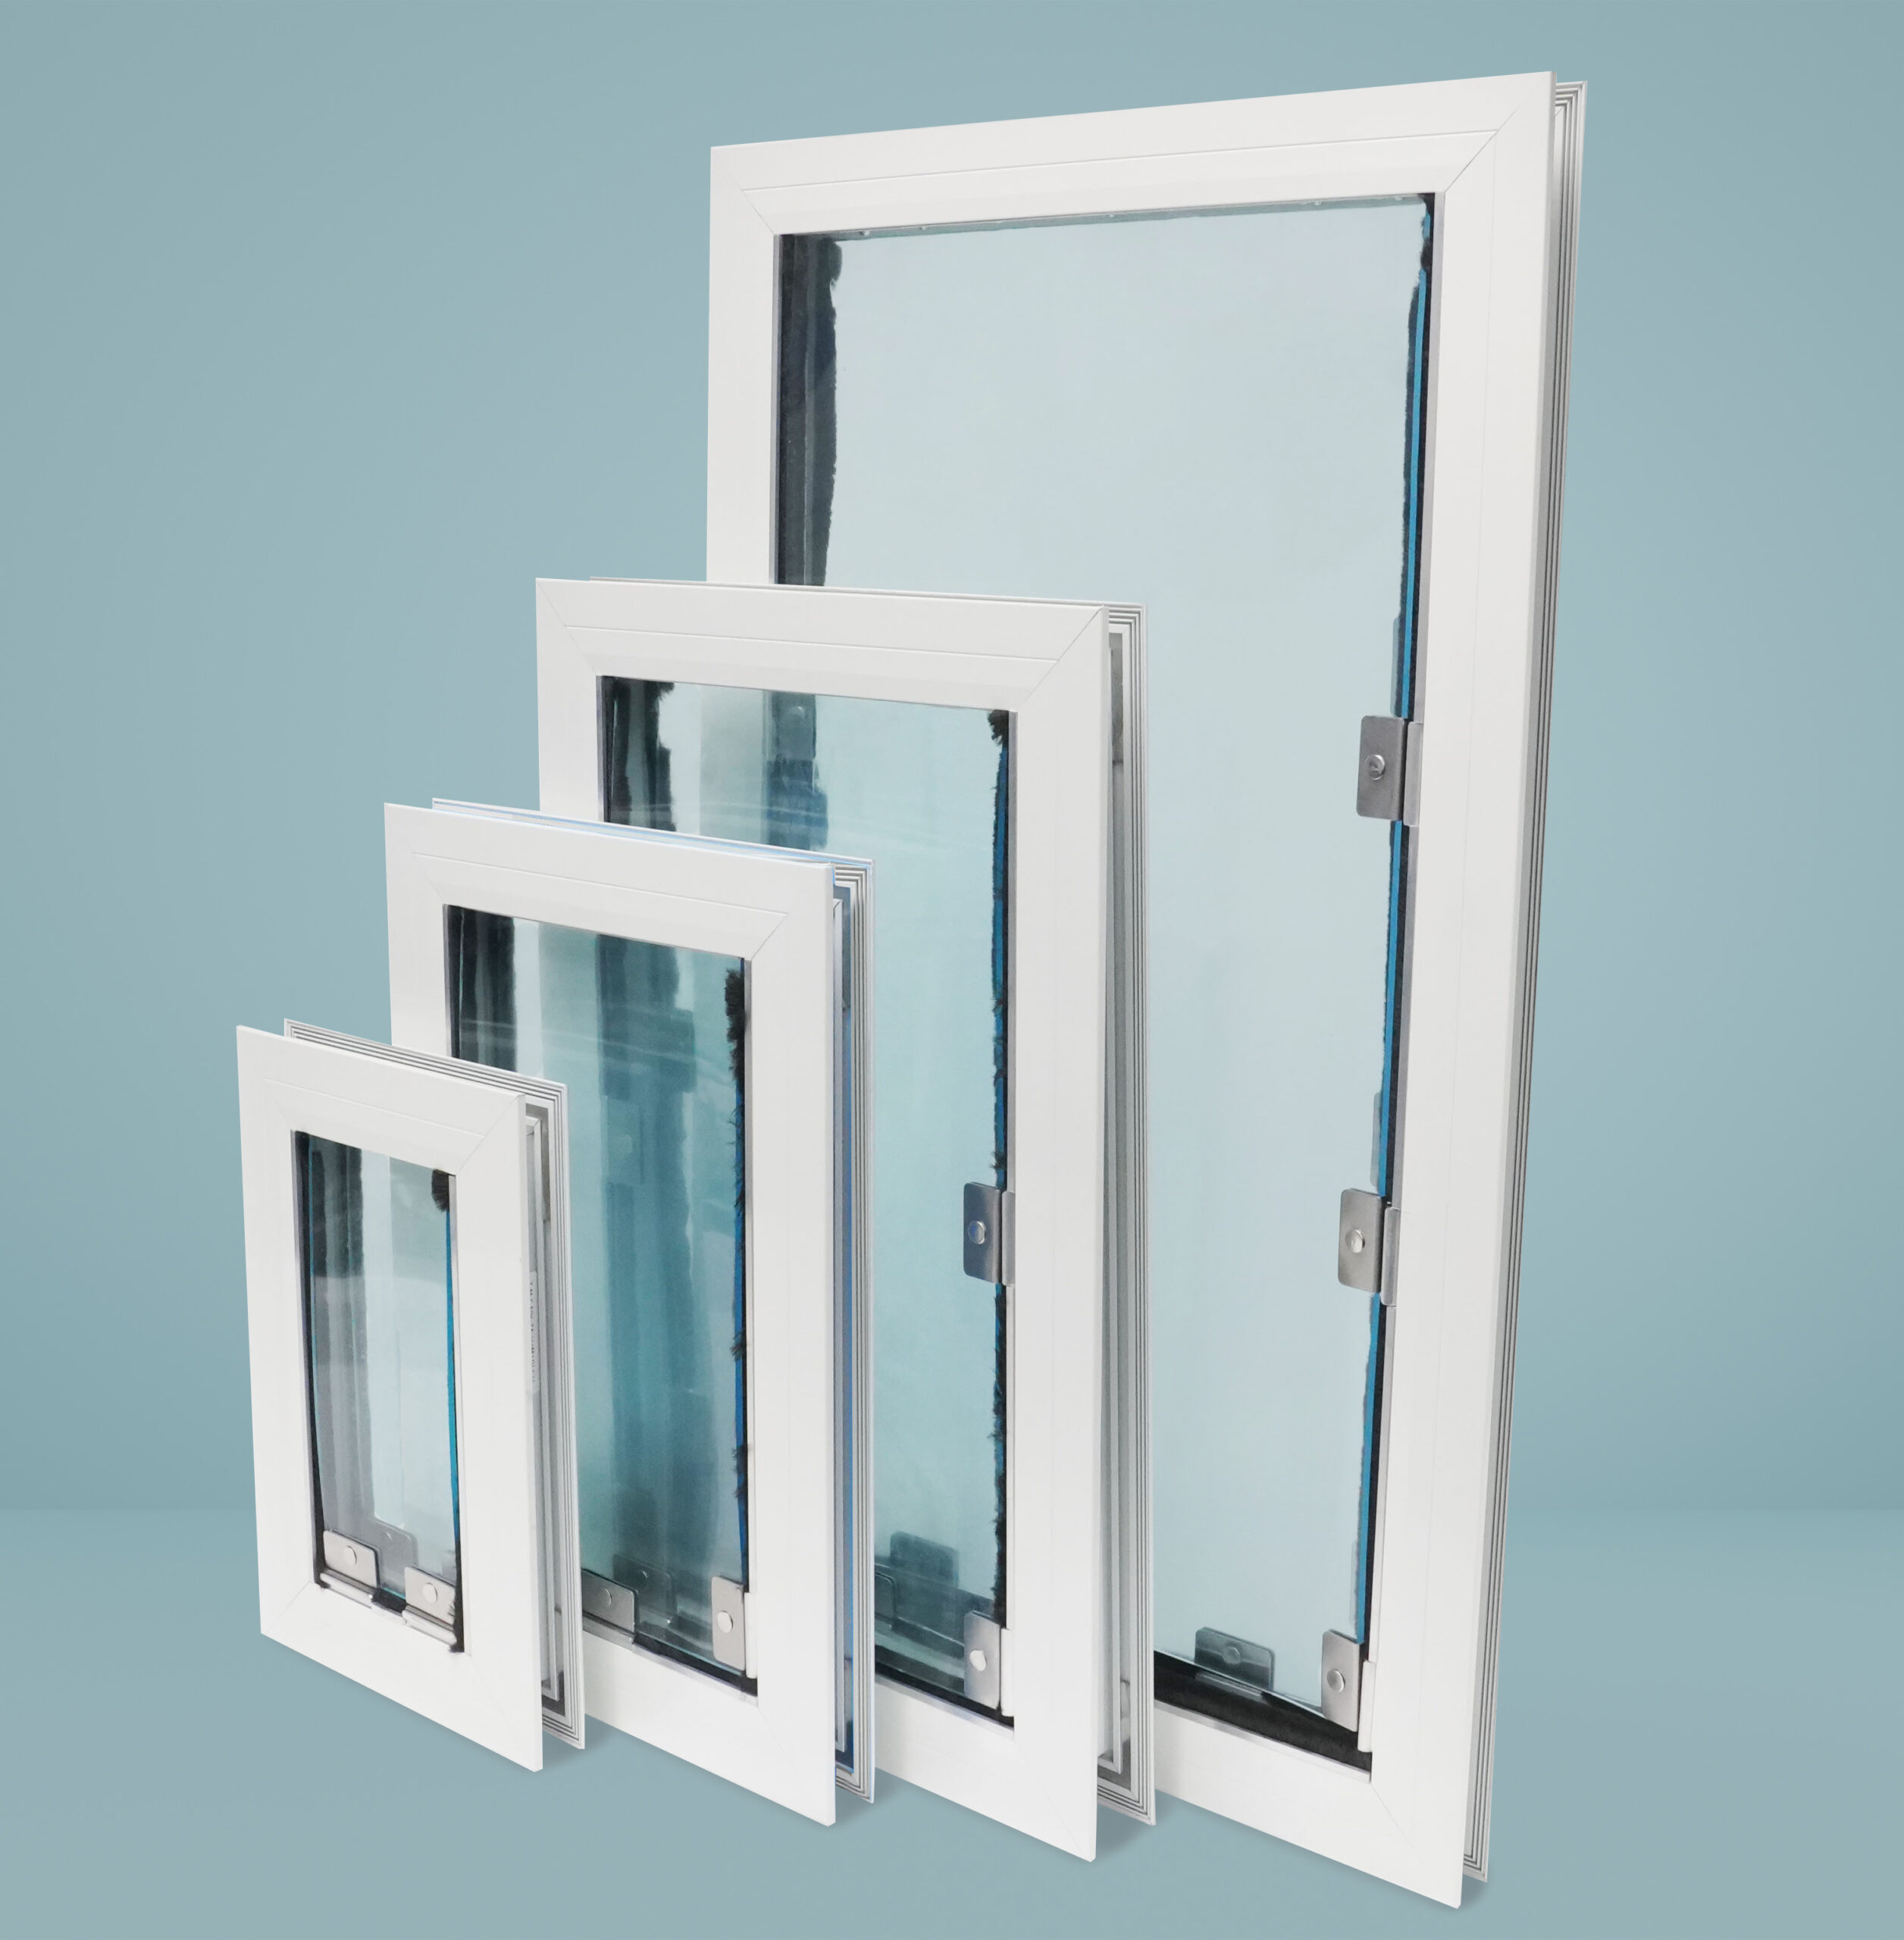 A photo with all four sizes of the Anlin pet door lined up on a blue background.